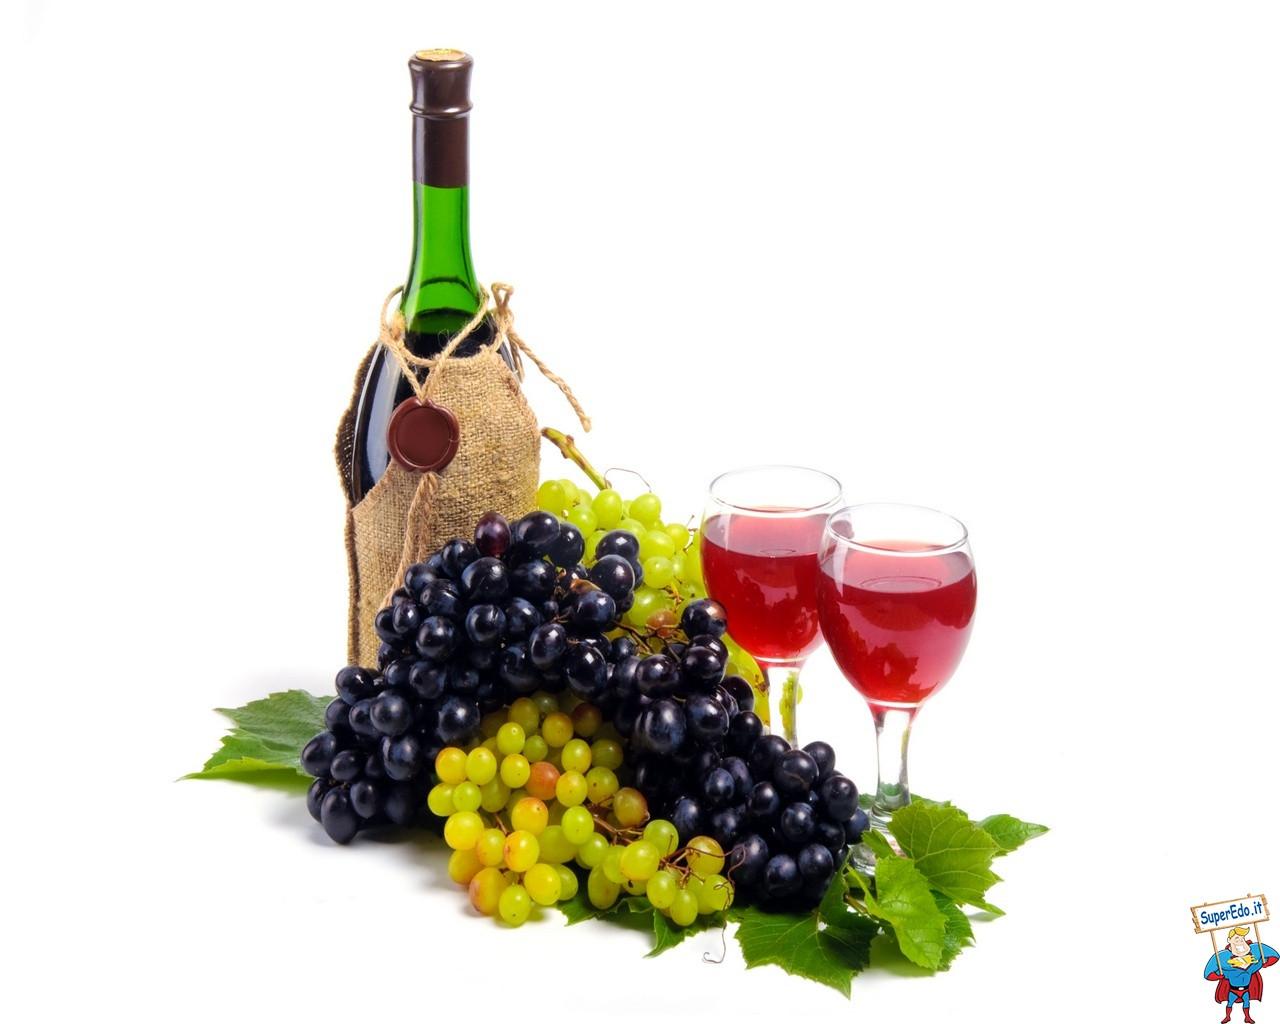 Wine Bottle and Grapes Wallpaper Awesome Vino Wallpaper